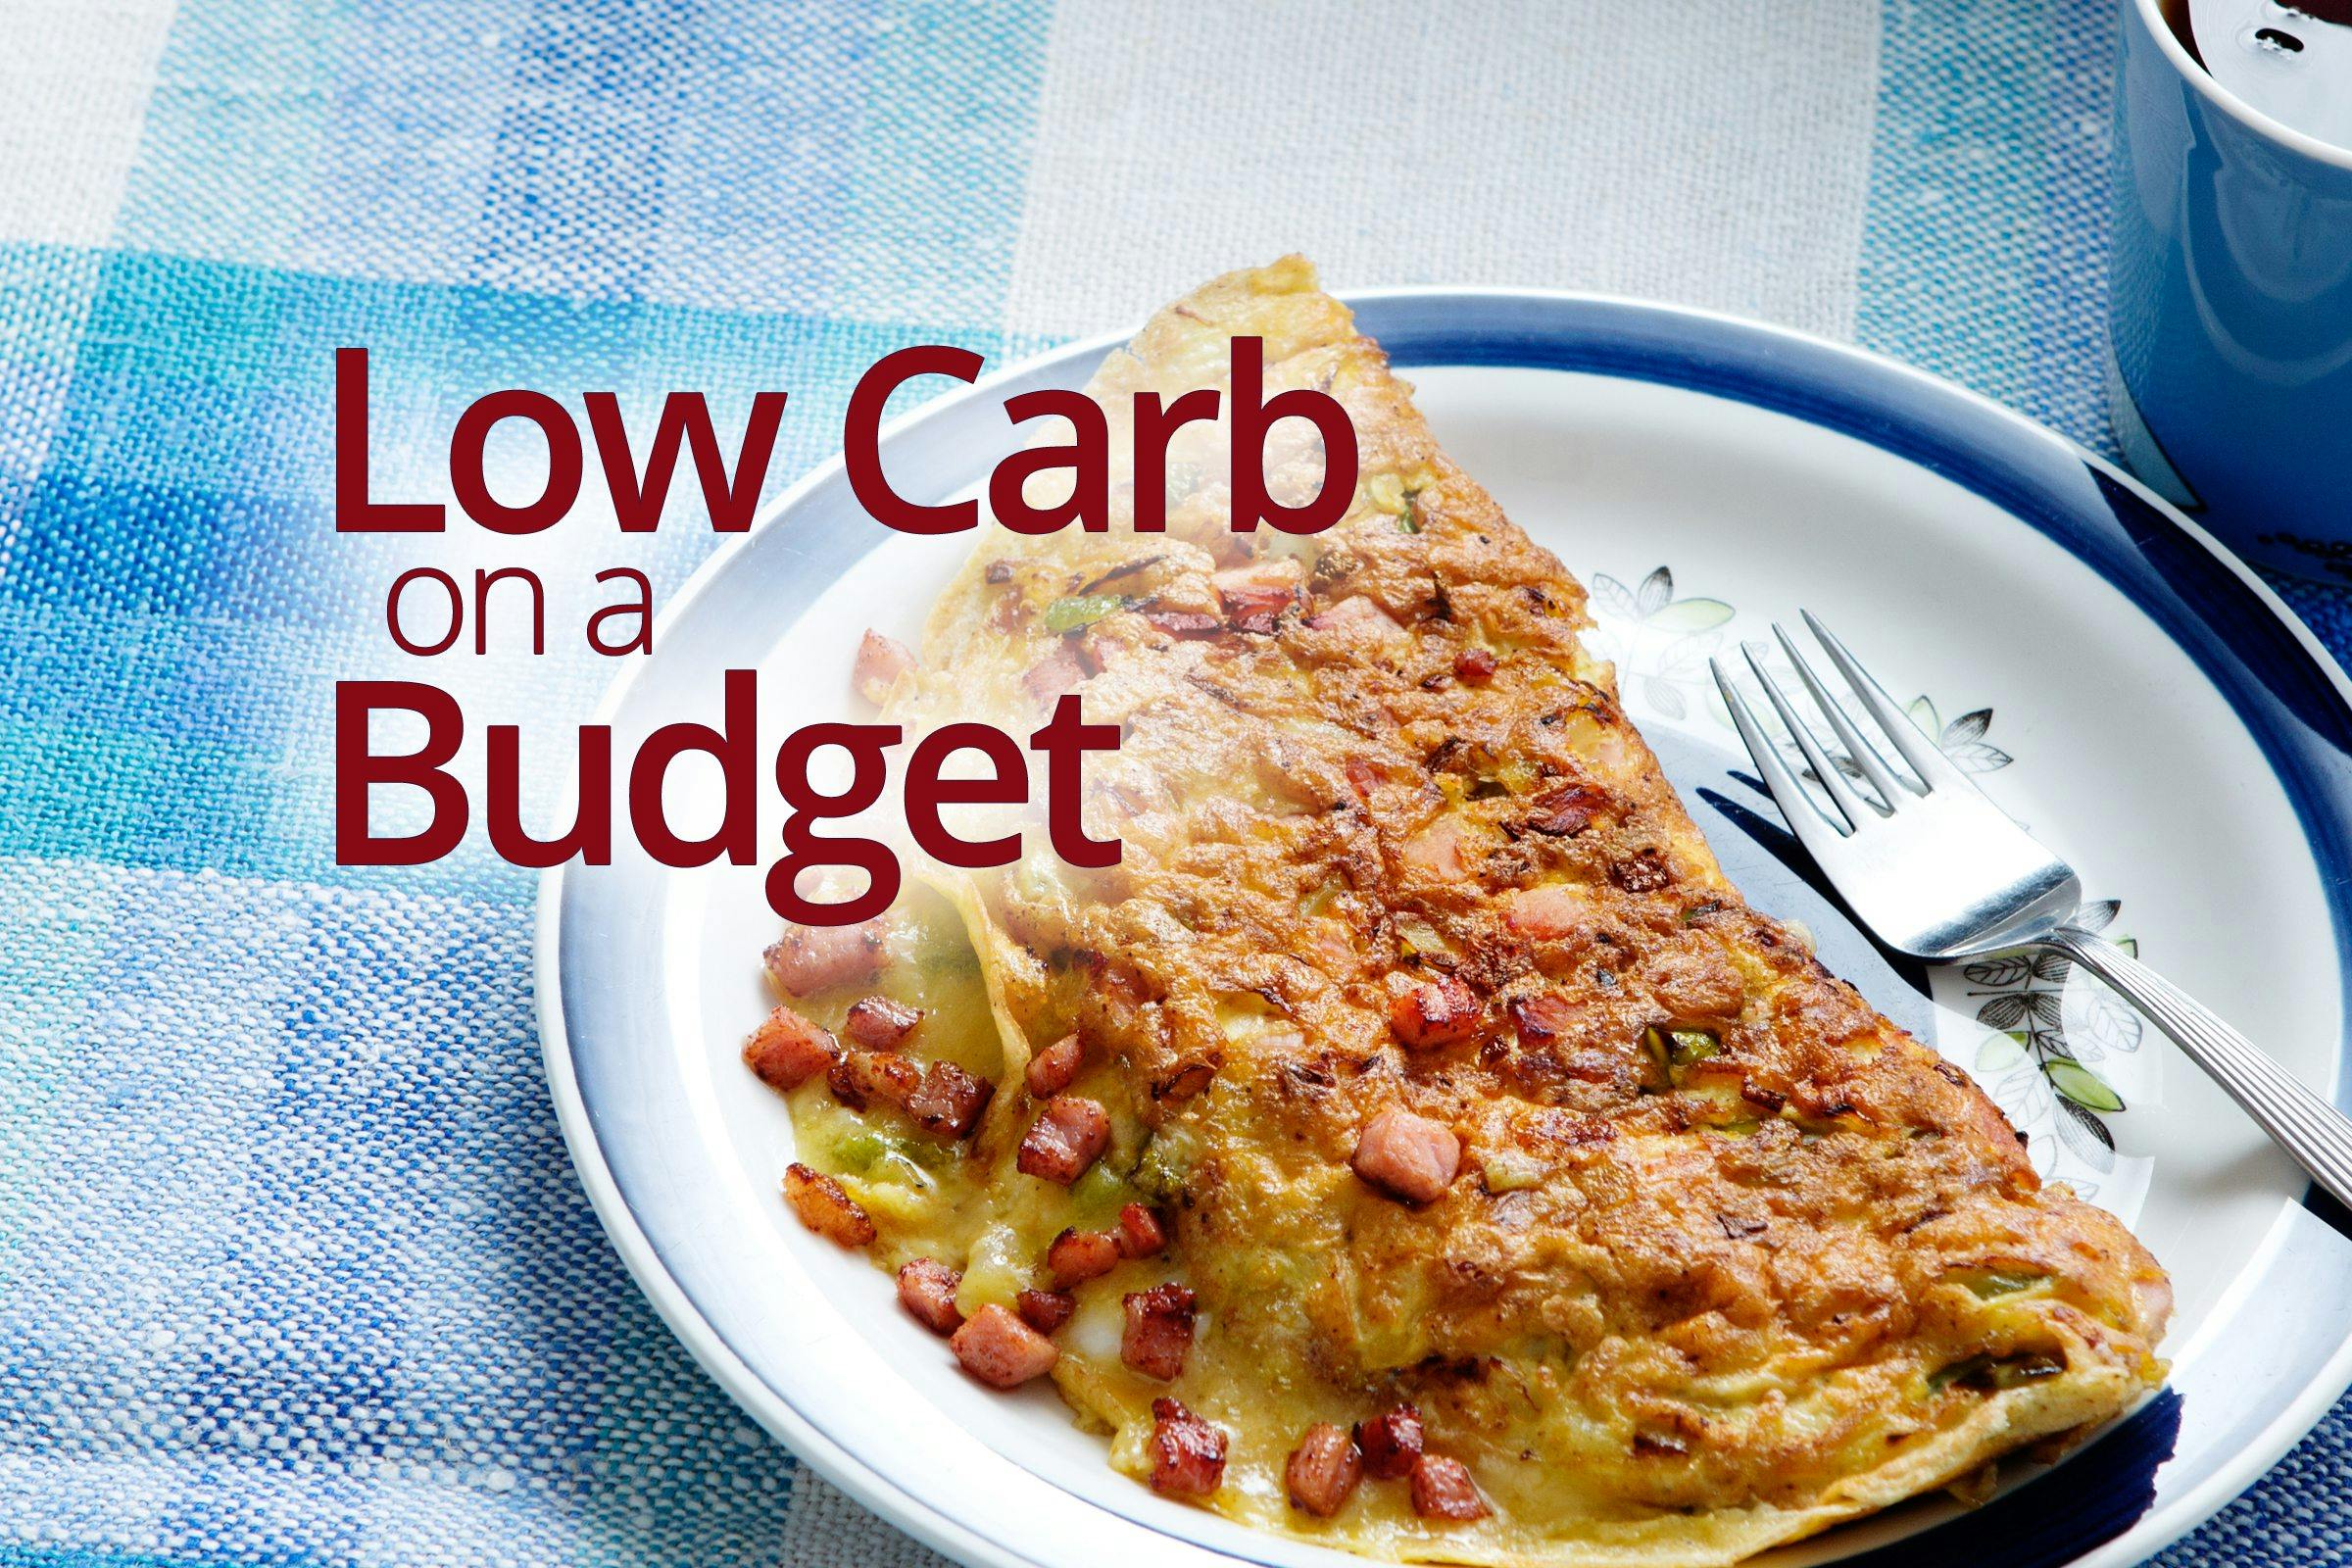 Low Carb on a Budget